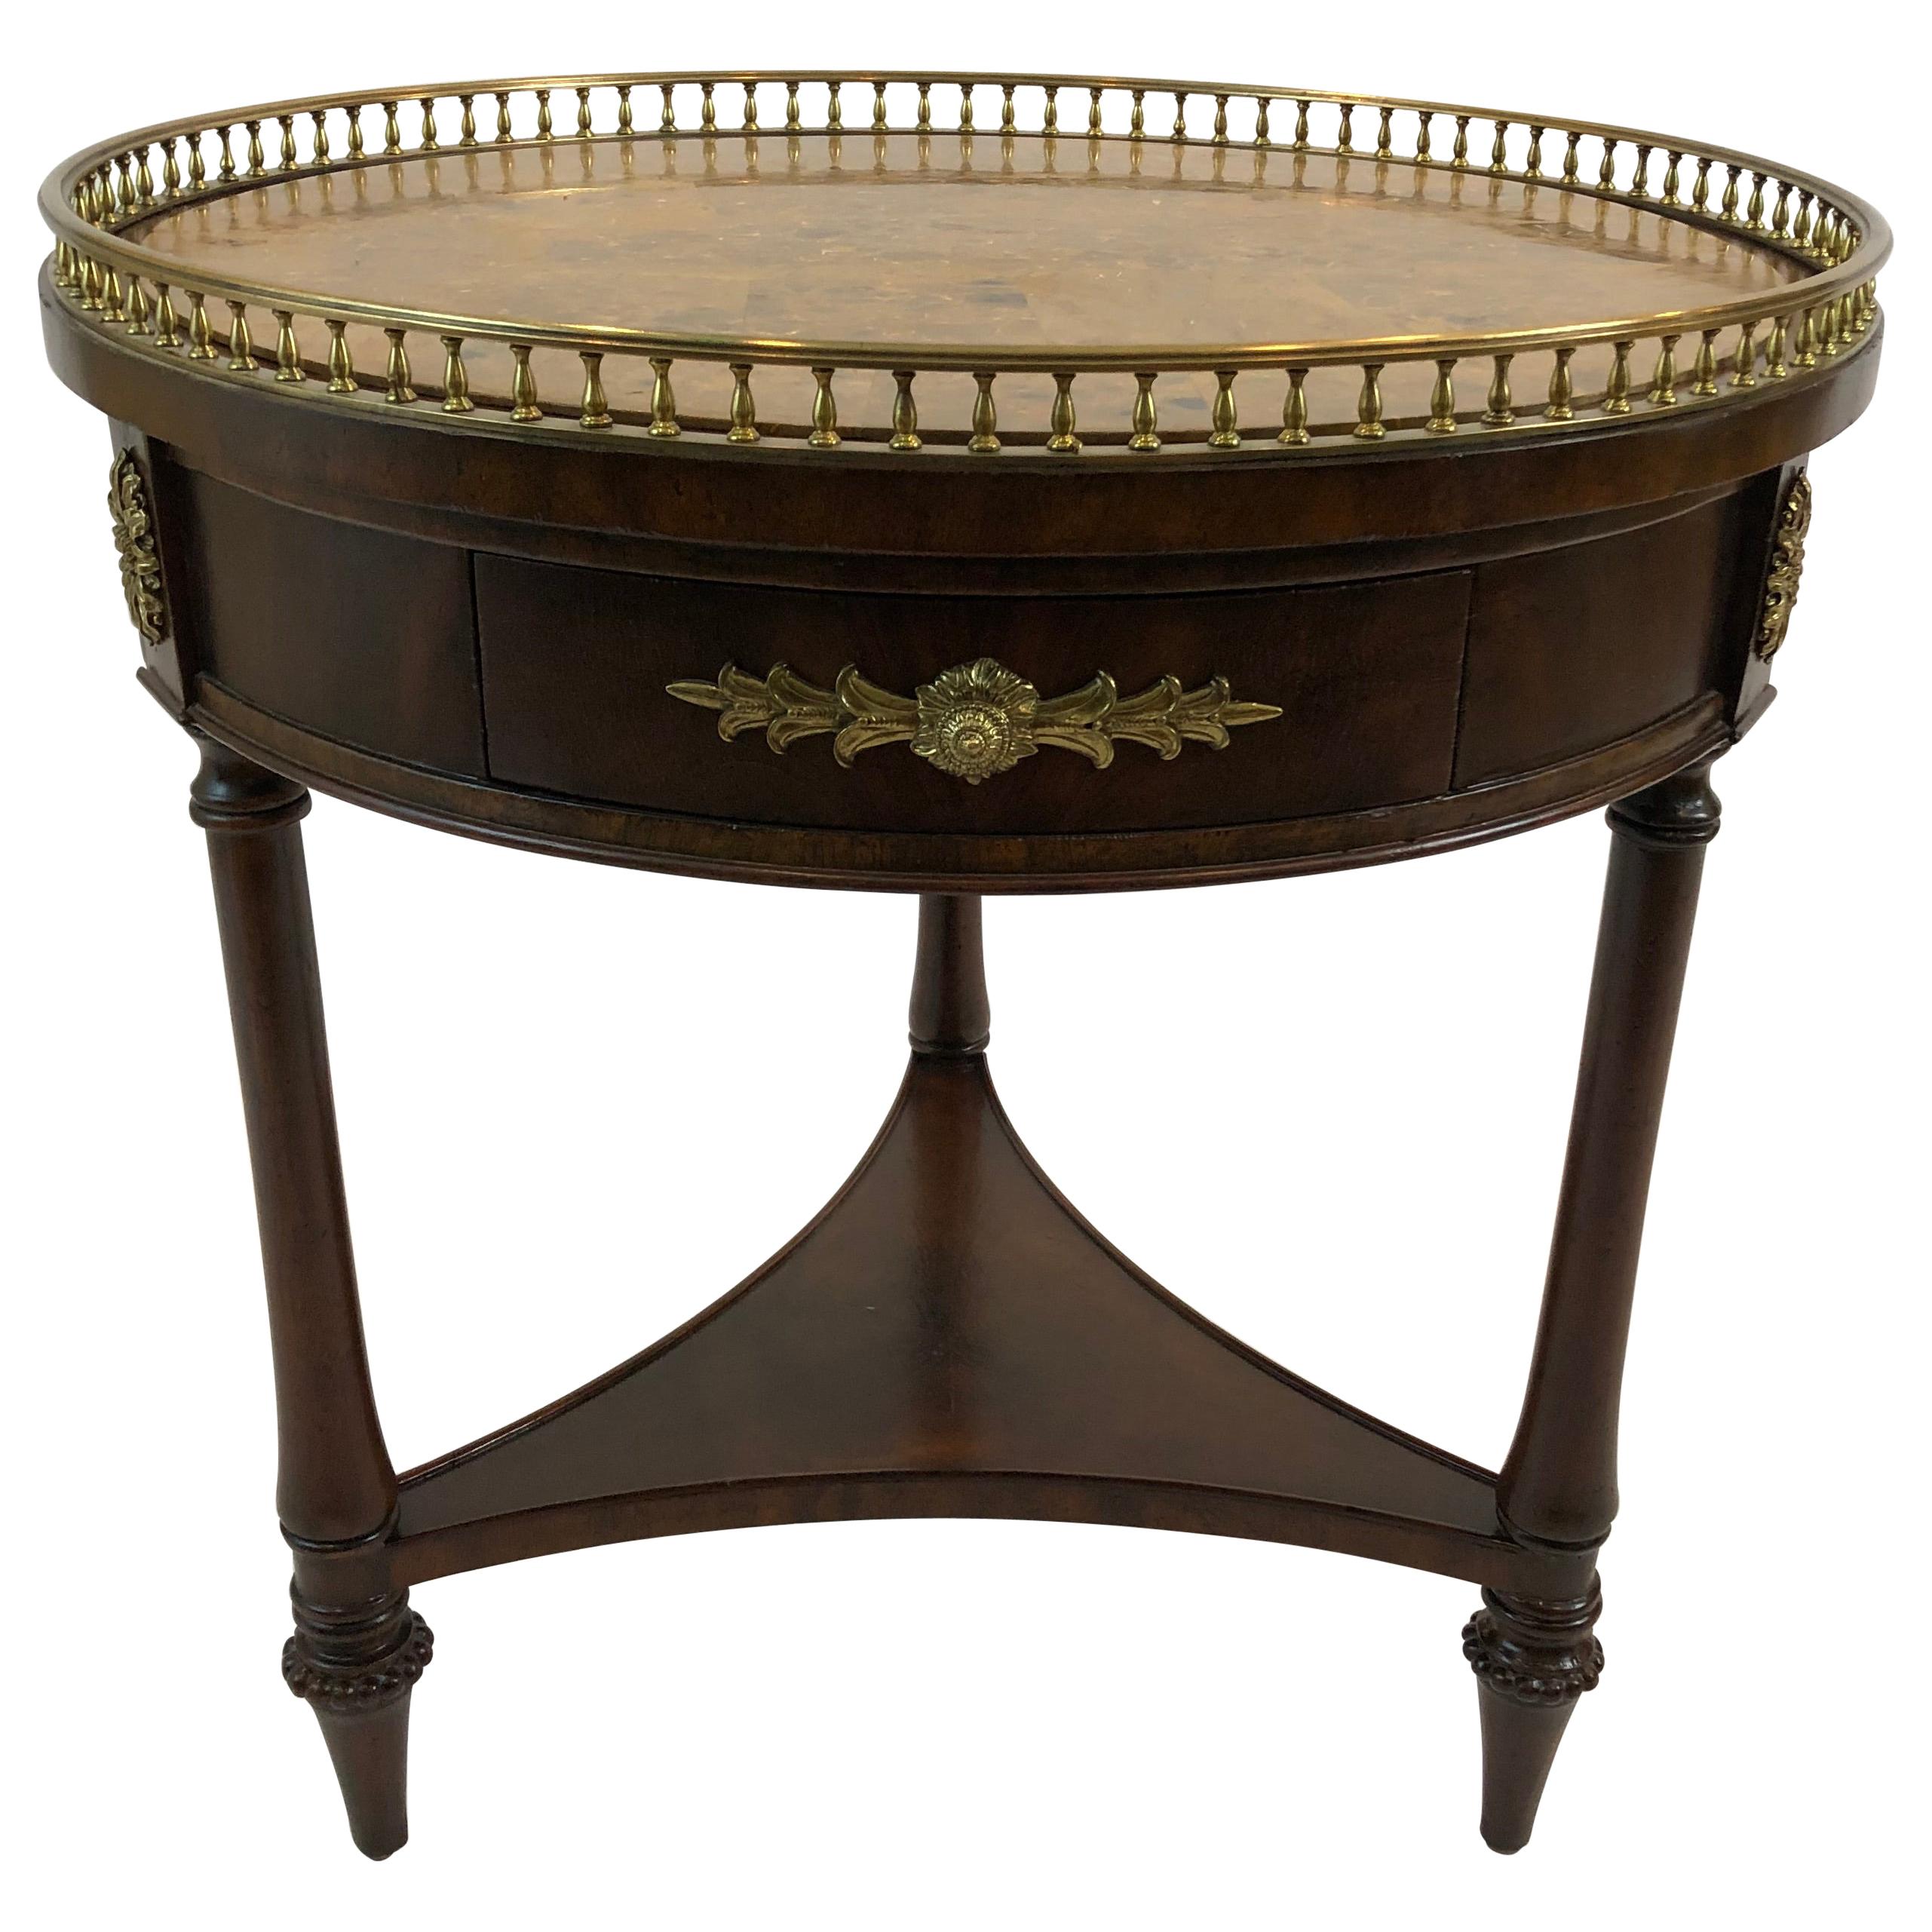 Elegant 3 Drawer Round Side Table with Faux Marble Top